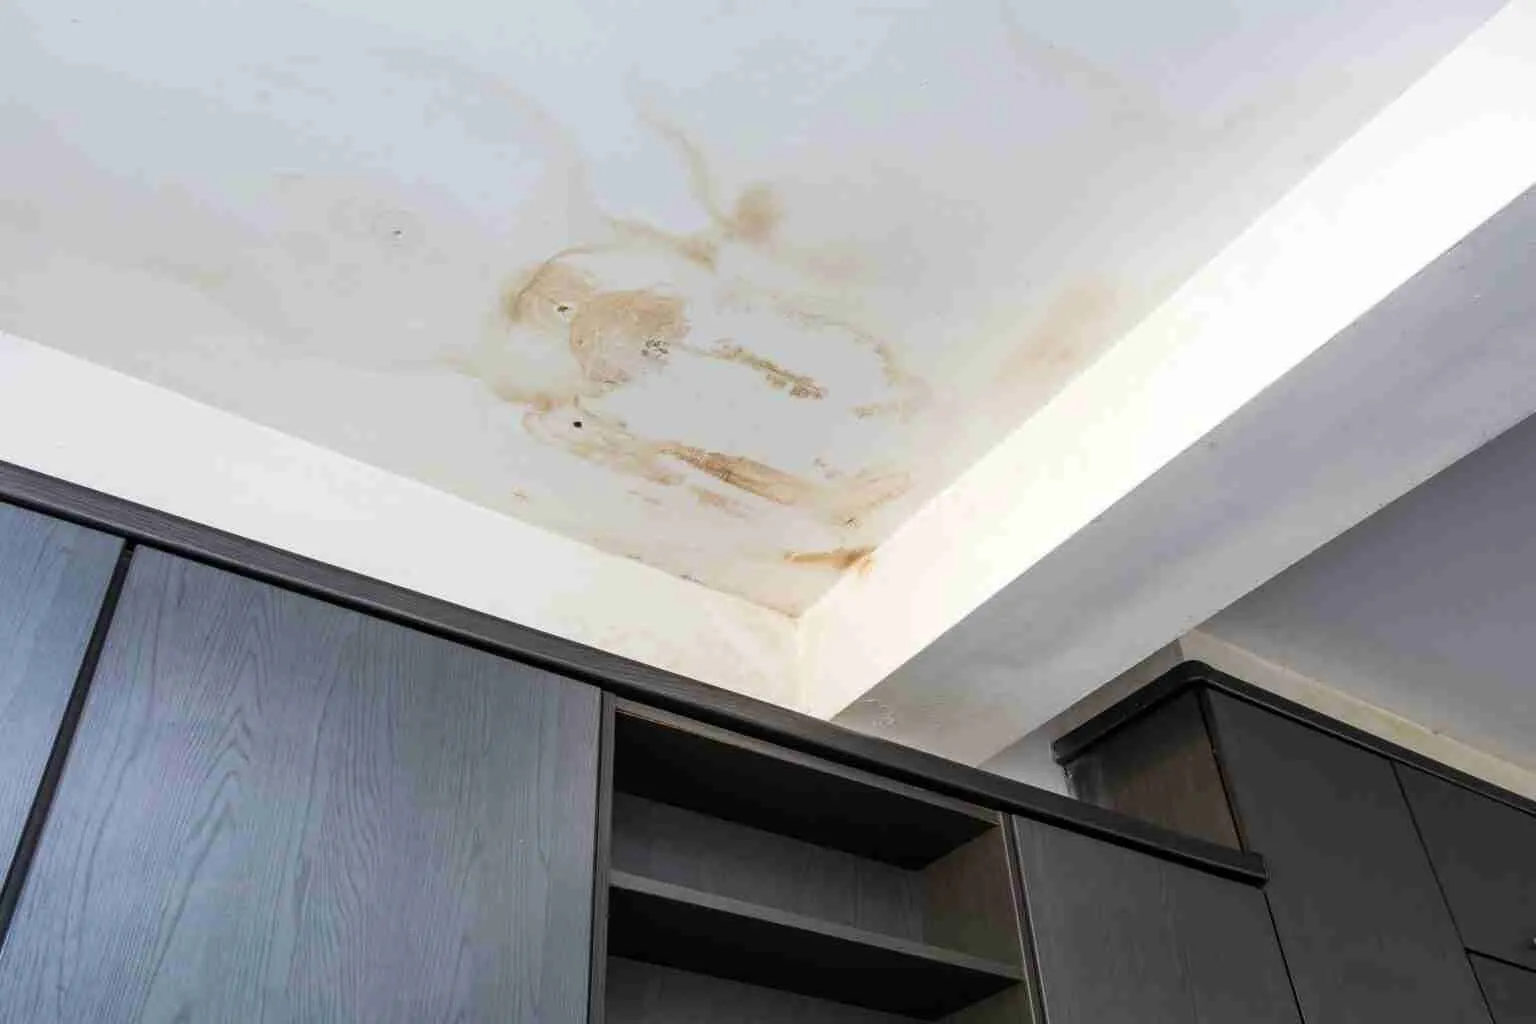 Roof leakage, water damaged ceiling roof and stain on ceiling close-up